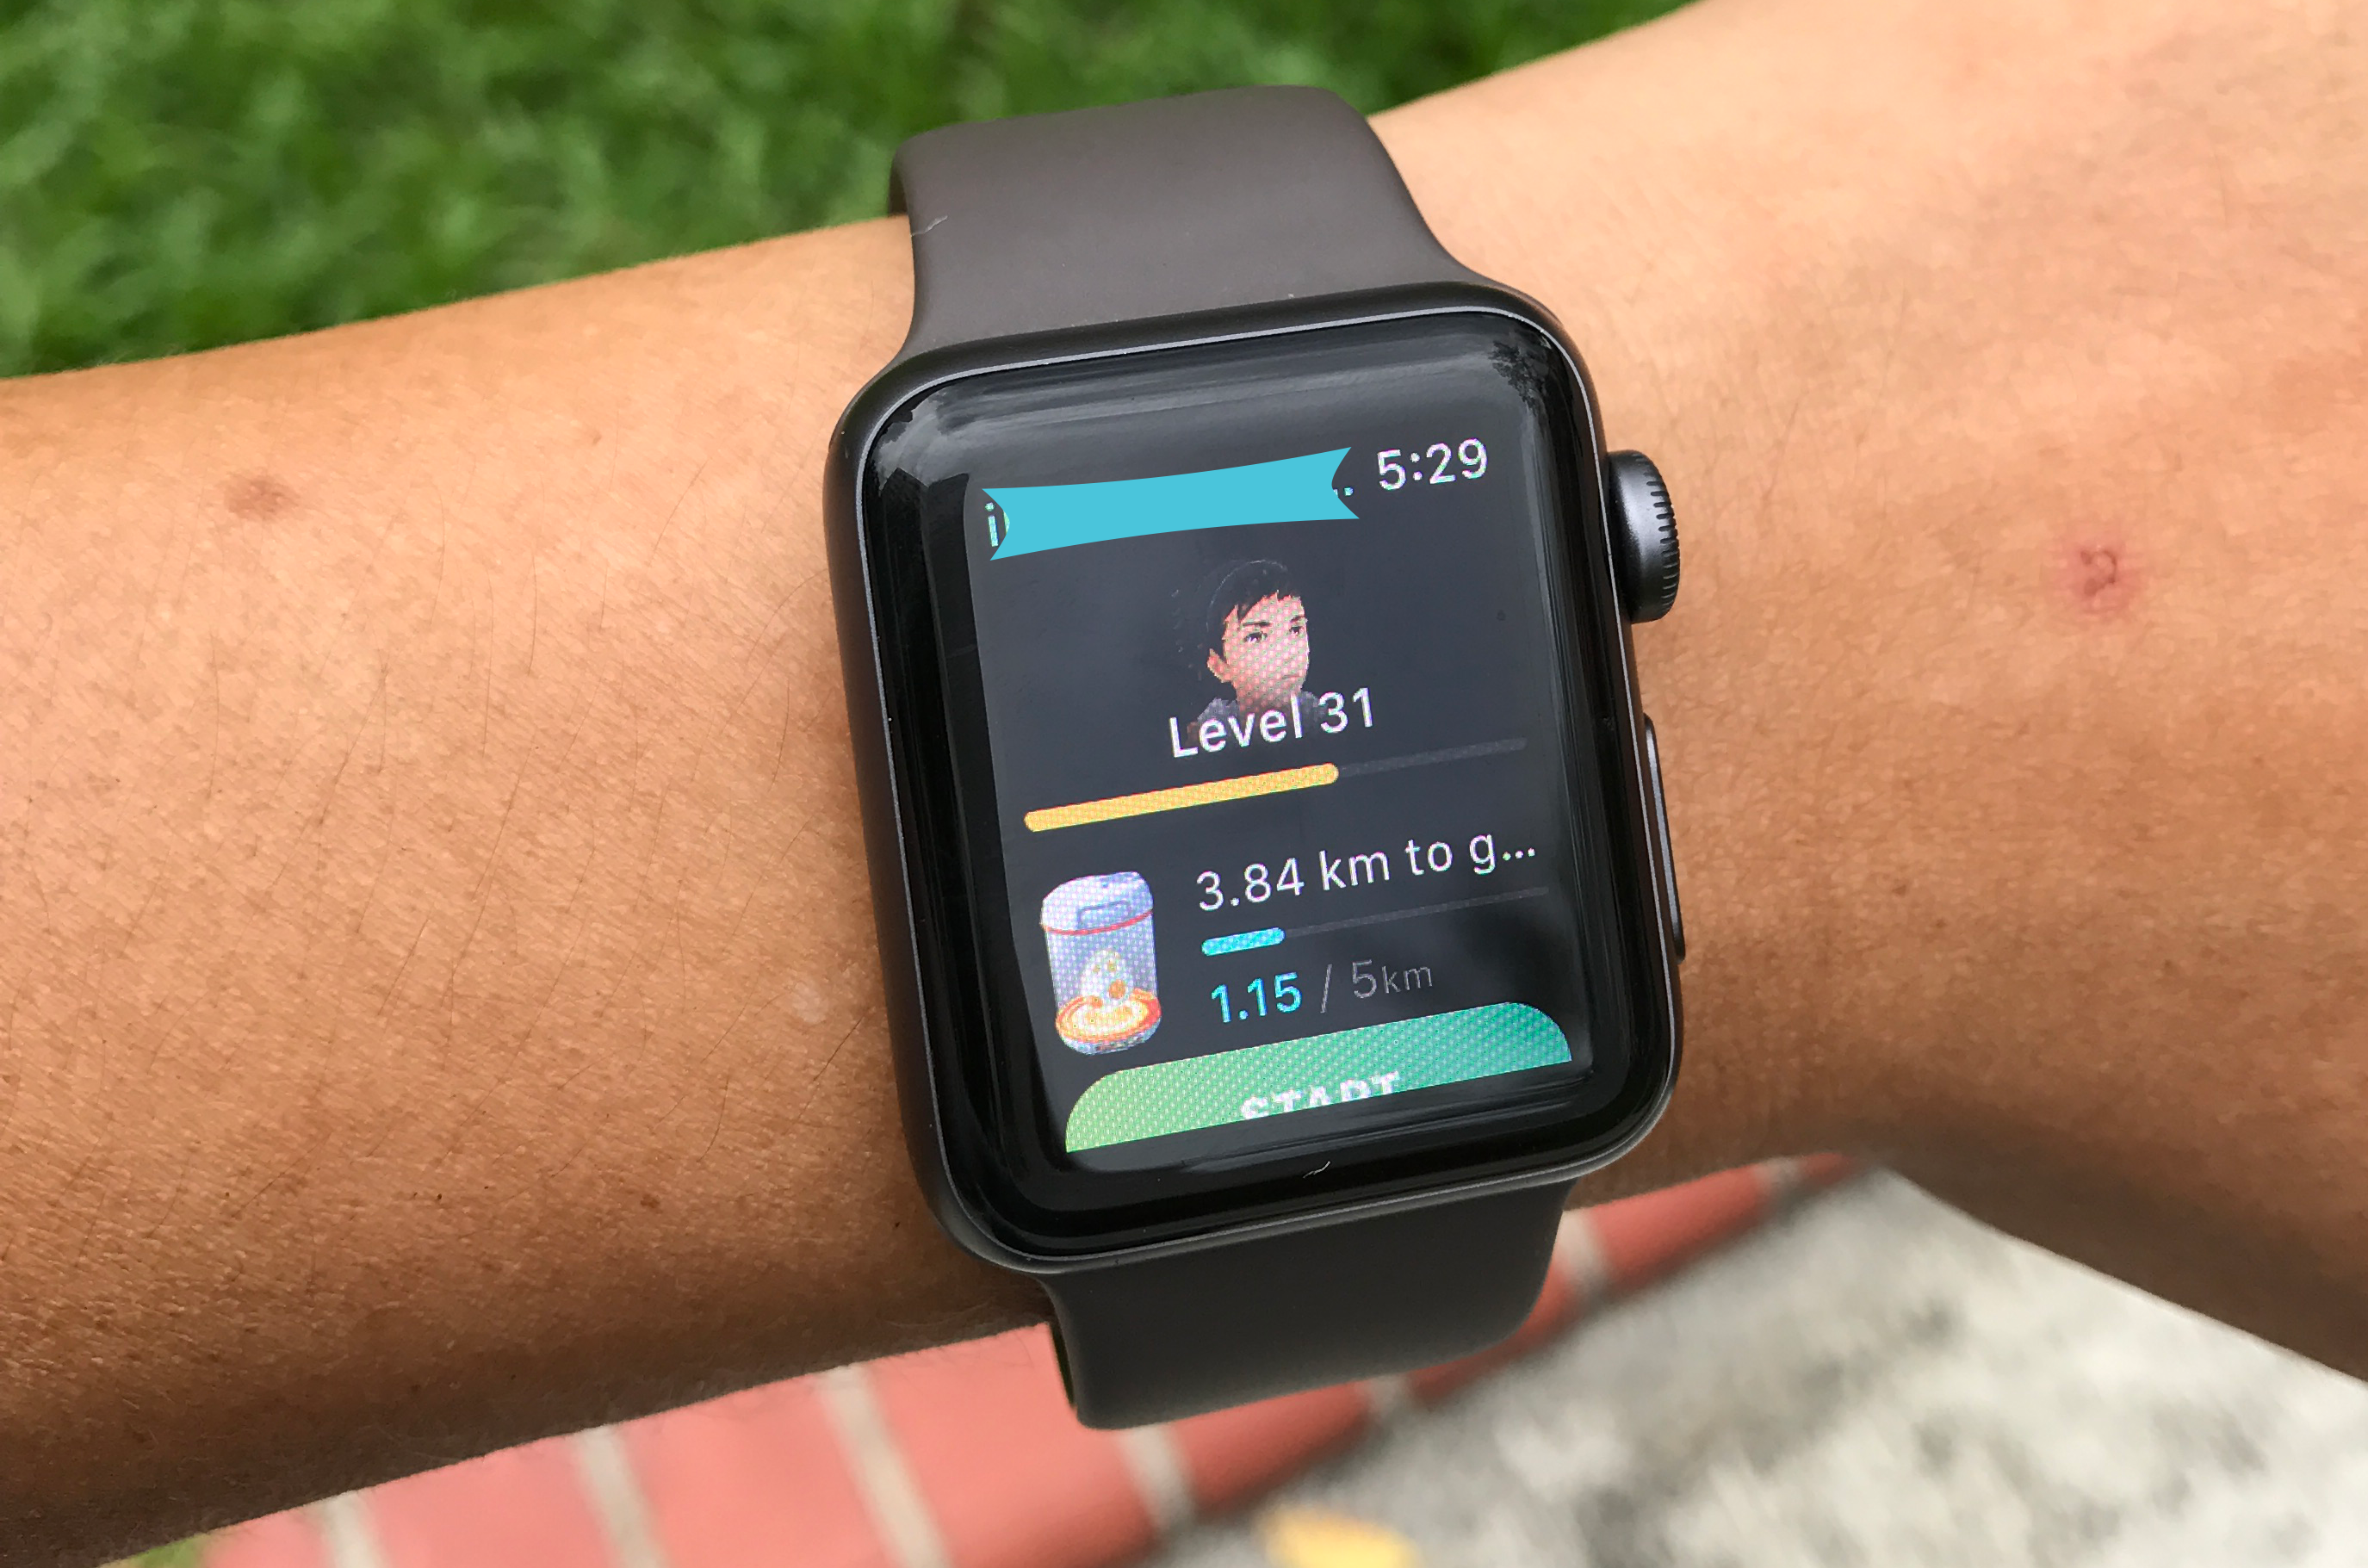 Pokemon Go is now available on Apple Watch!